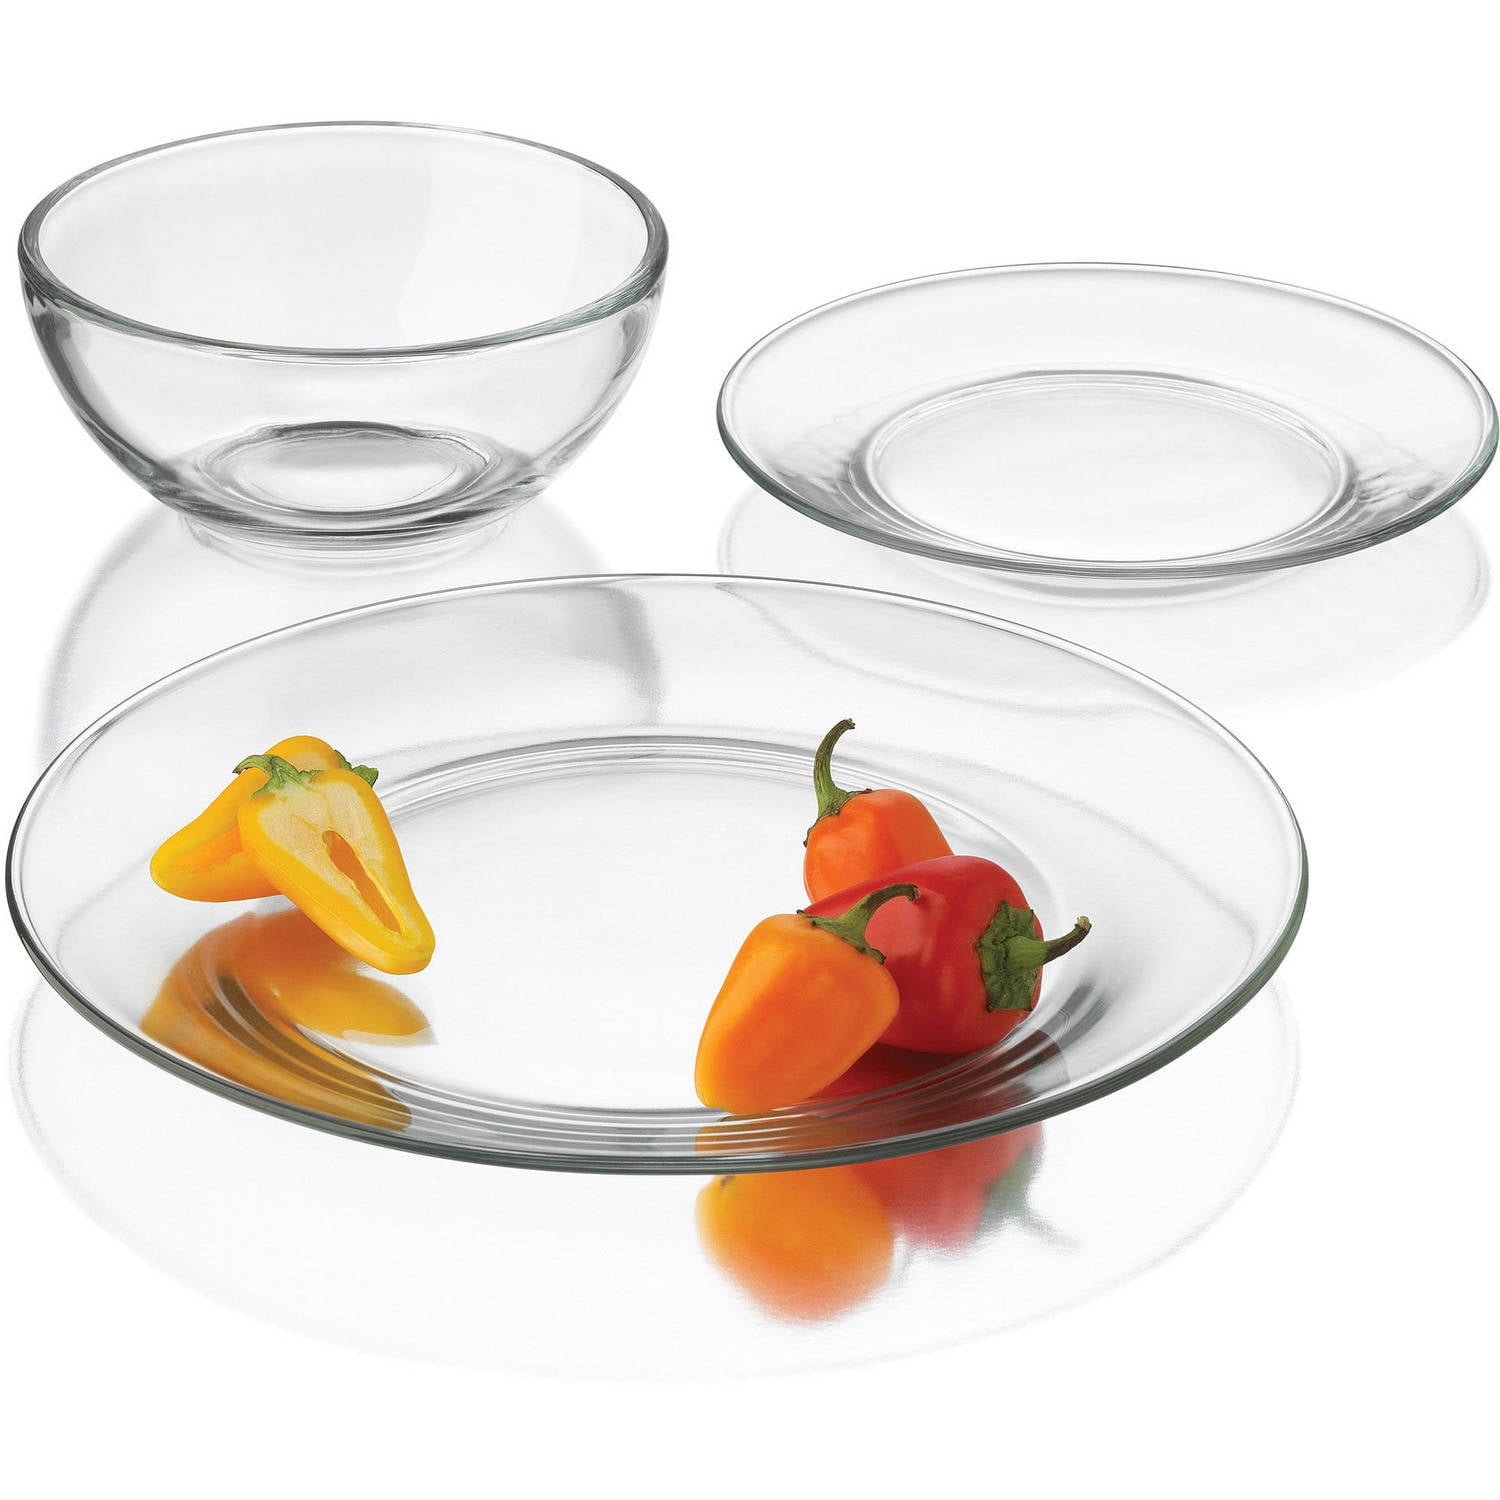 Details about   Moderno 12-Piece Clear Glass Salad or Dessert Plate Set 